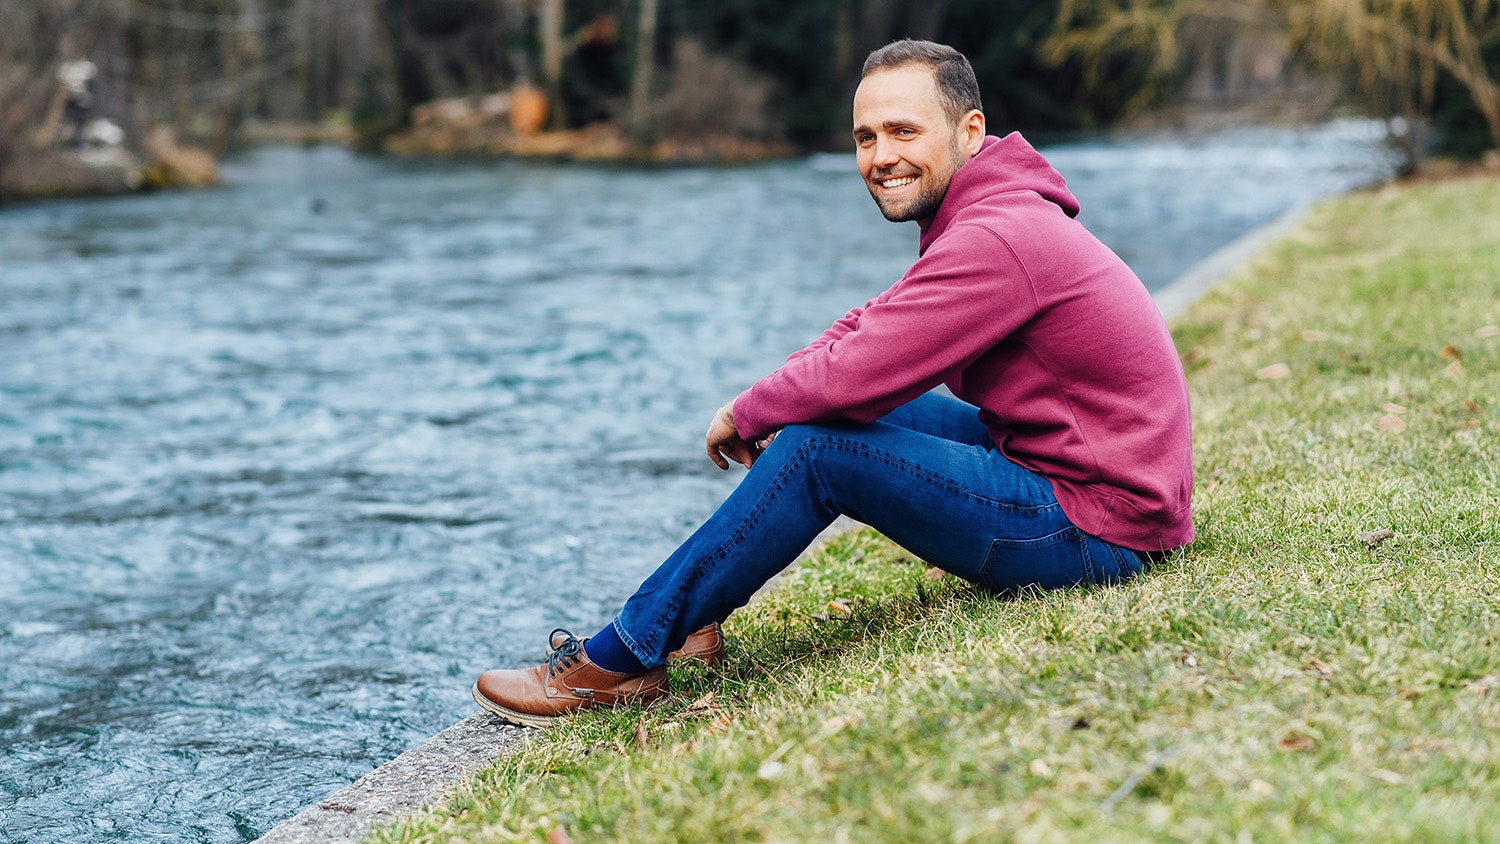 Tobias Bartsch sitting on a grass on a riverbank, smiling.